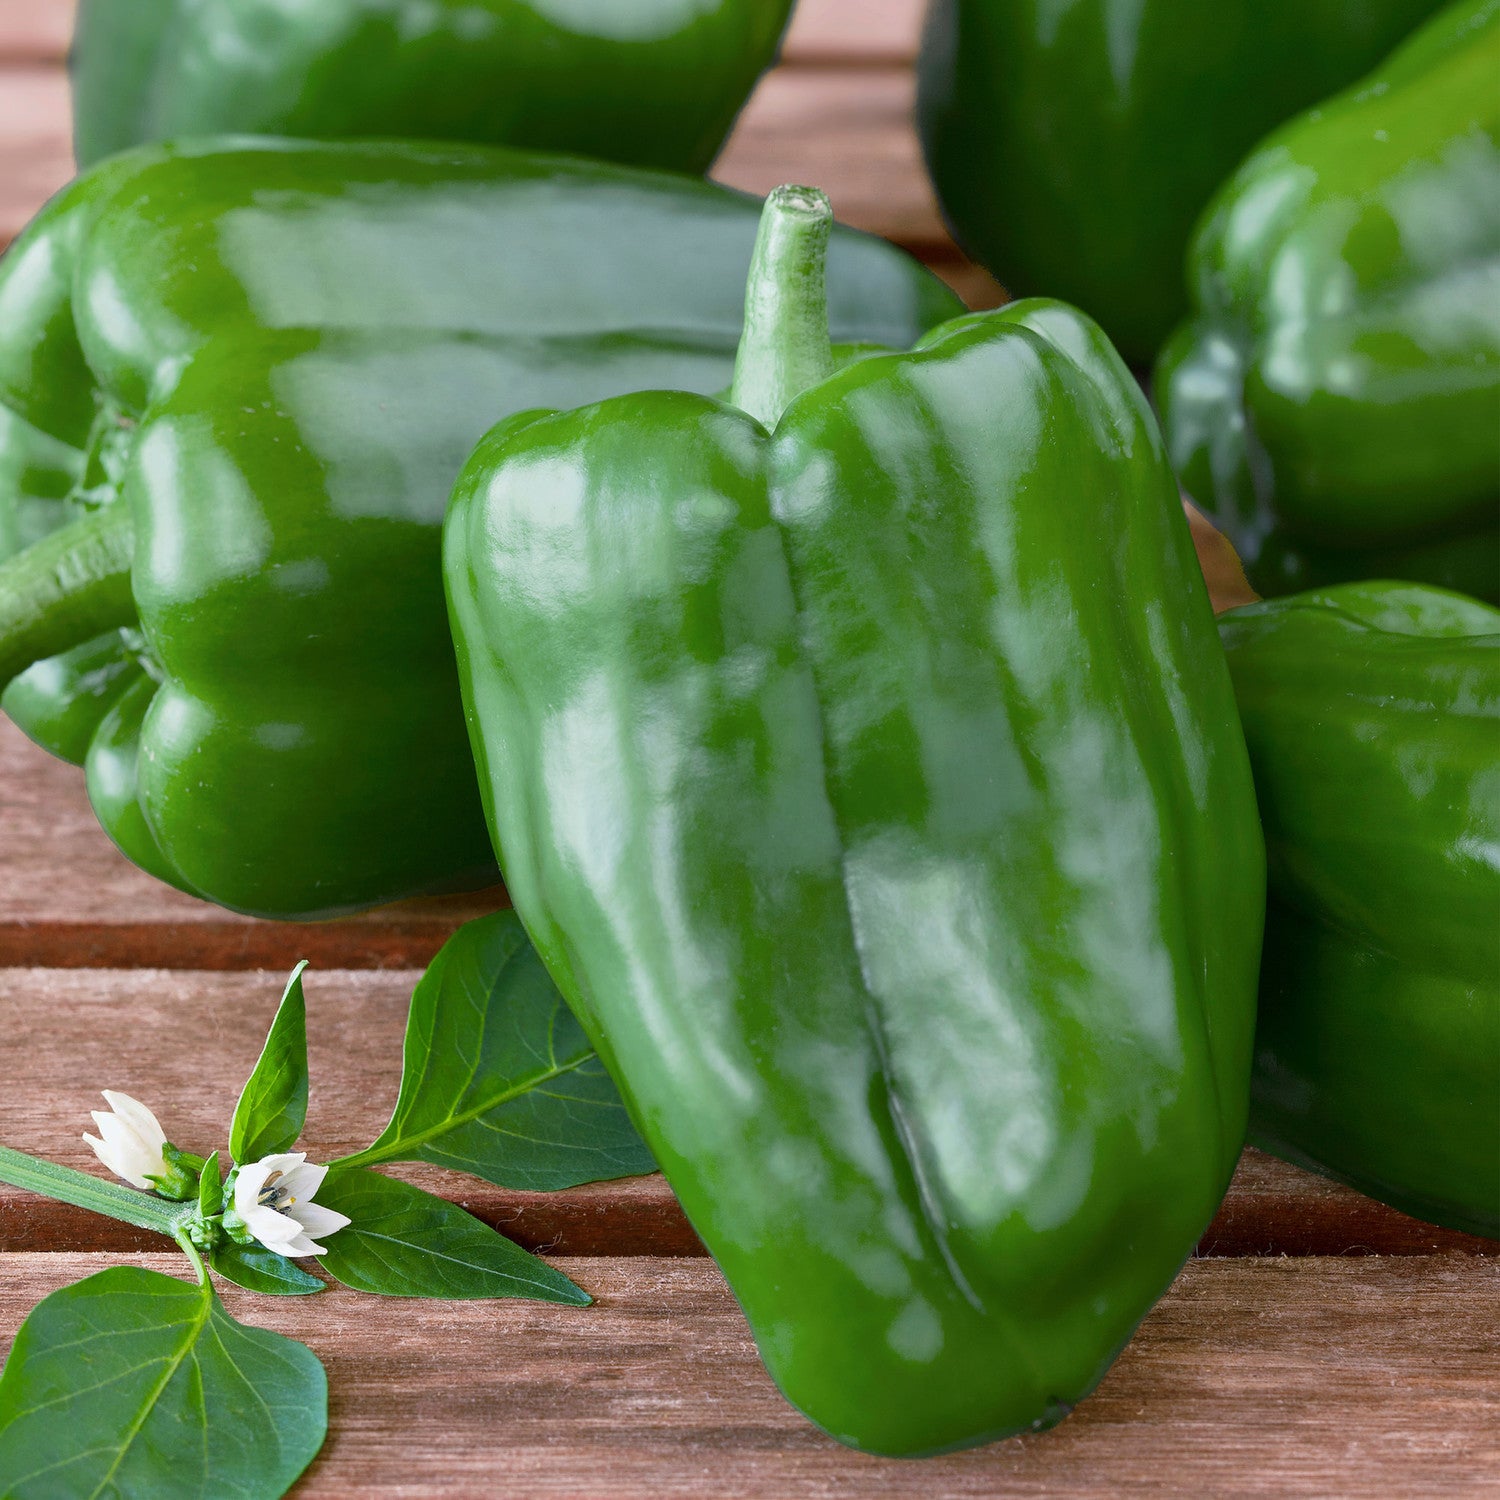 Red Pepper Vs. Green Pepper - How Do They Compare?